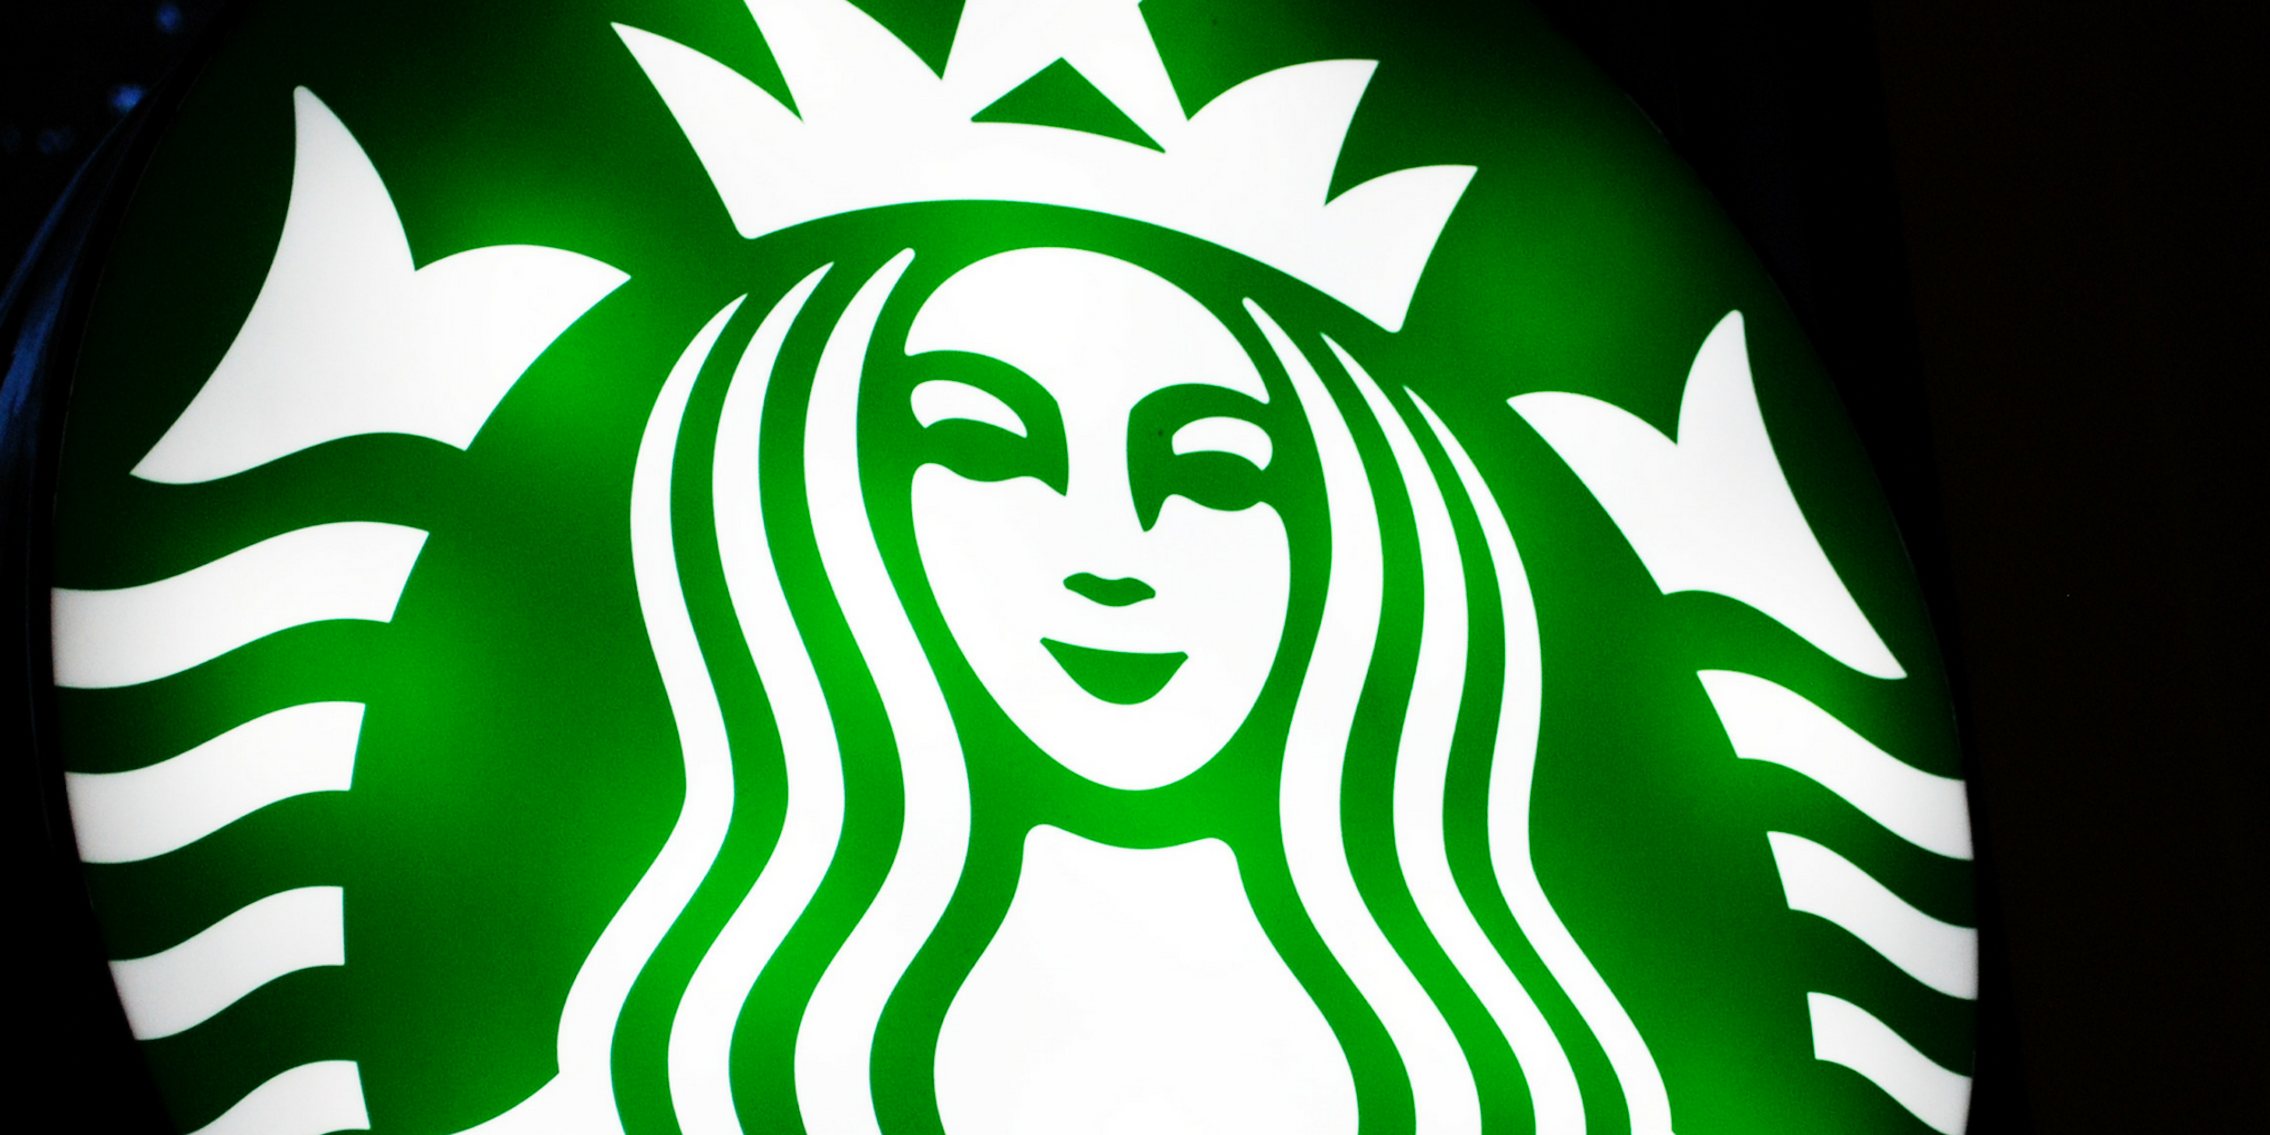 A lit sign with the Starbucks siren logo